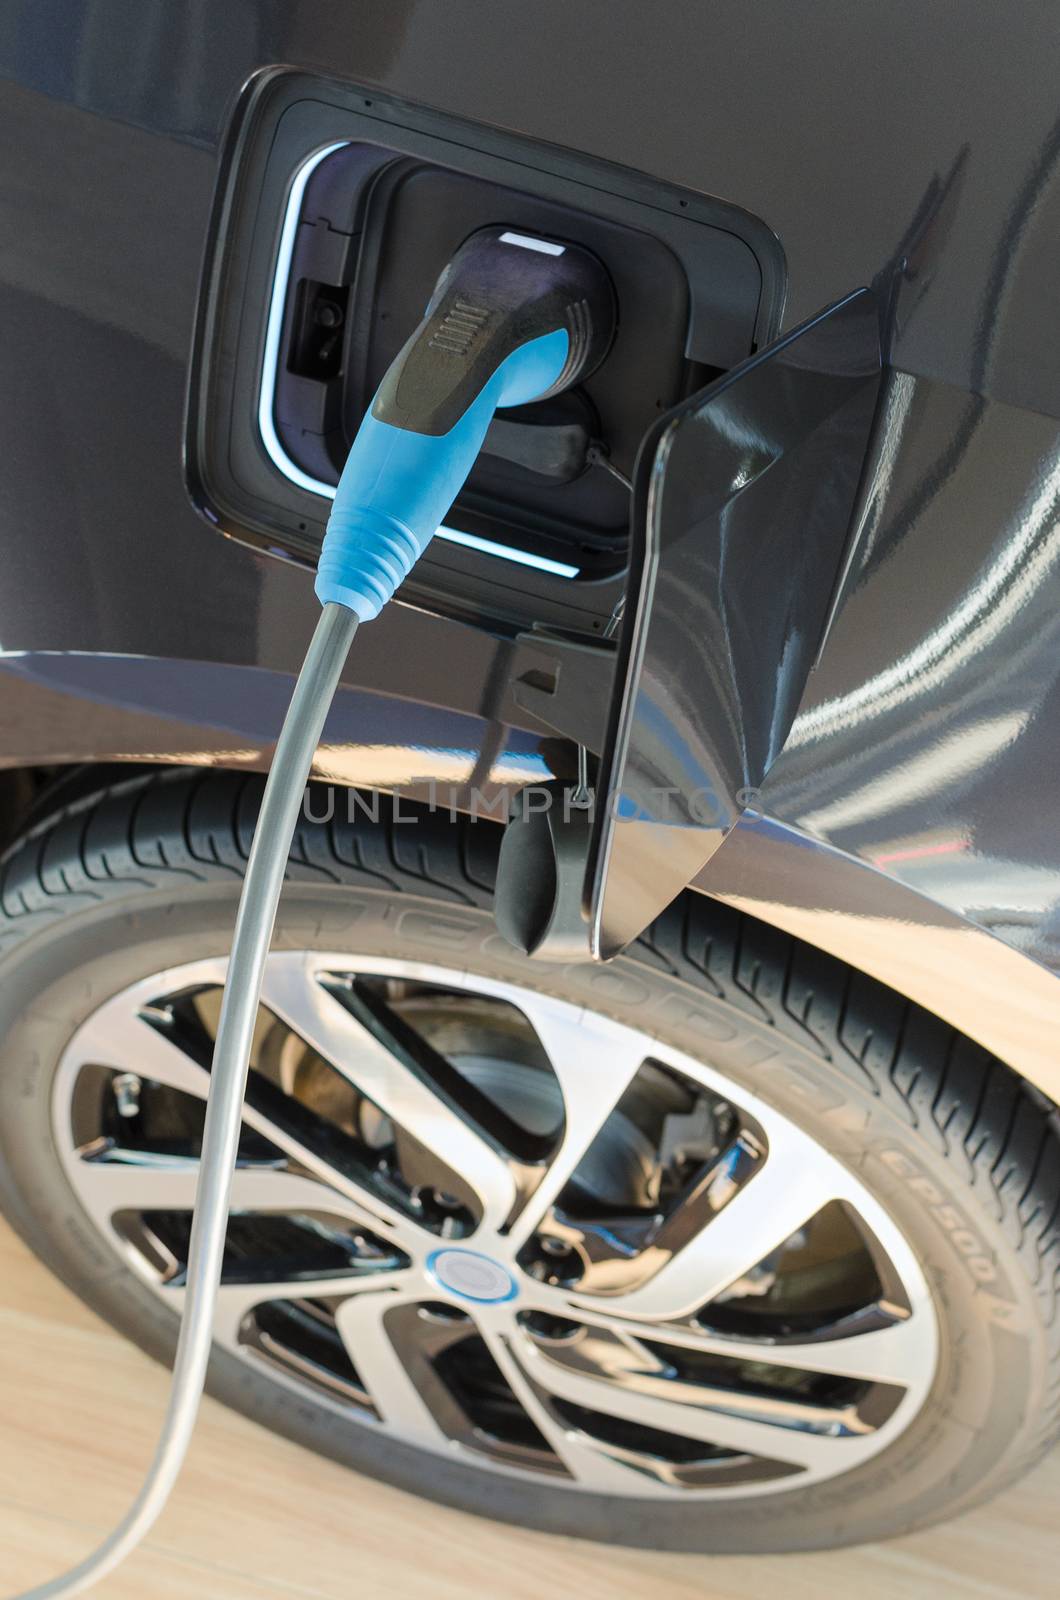 Modern electric car plugged in to power supply charging station by servickuz